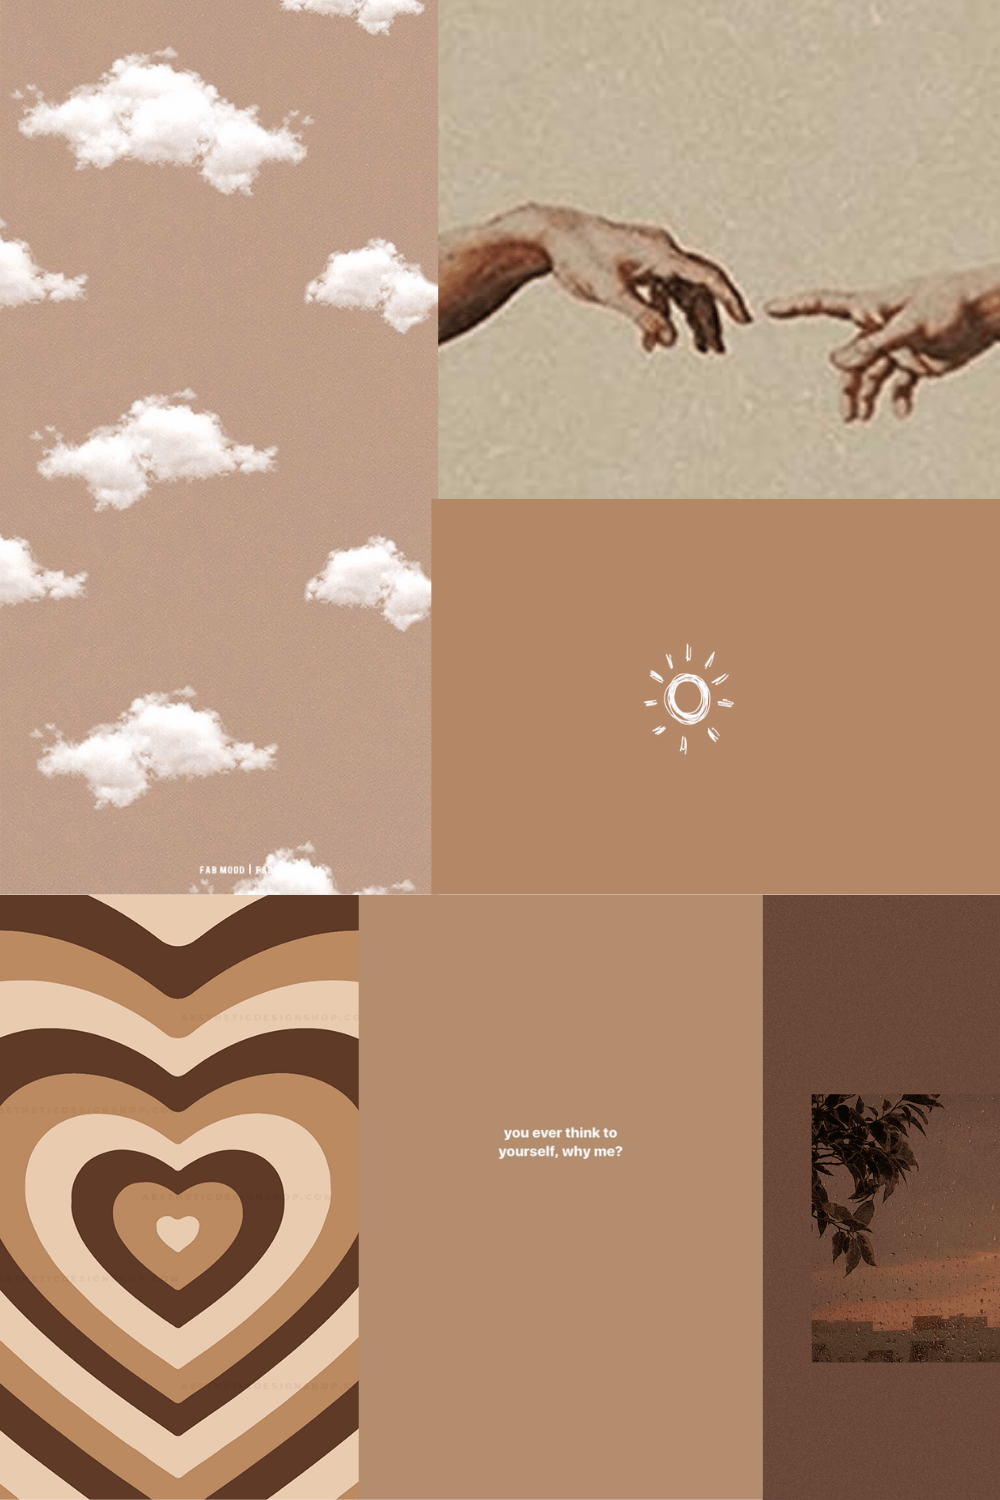 A collage of images with hands and hearts - Light brown, brown